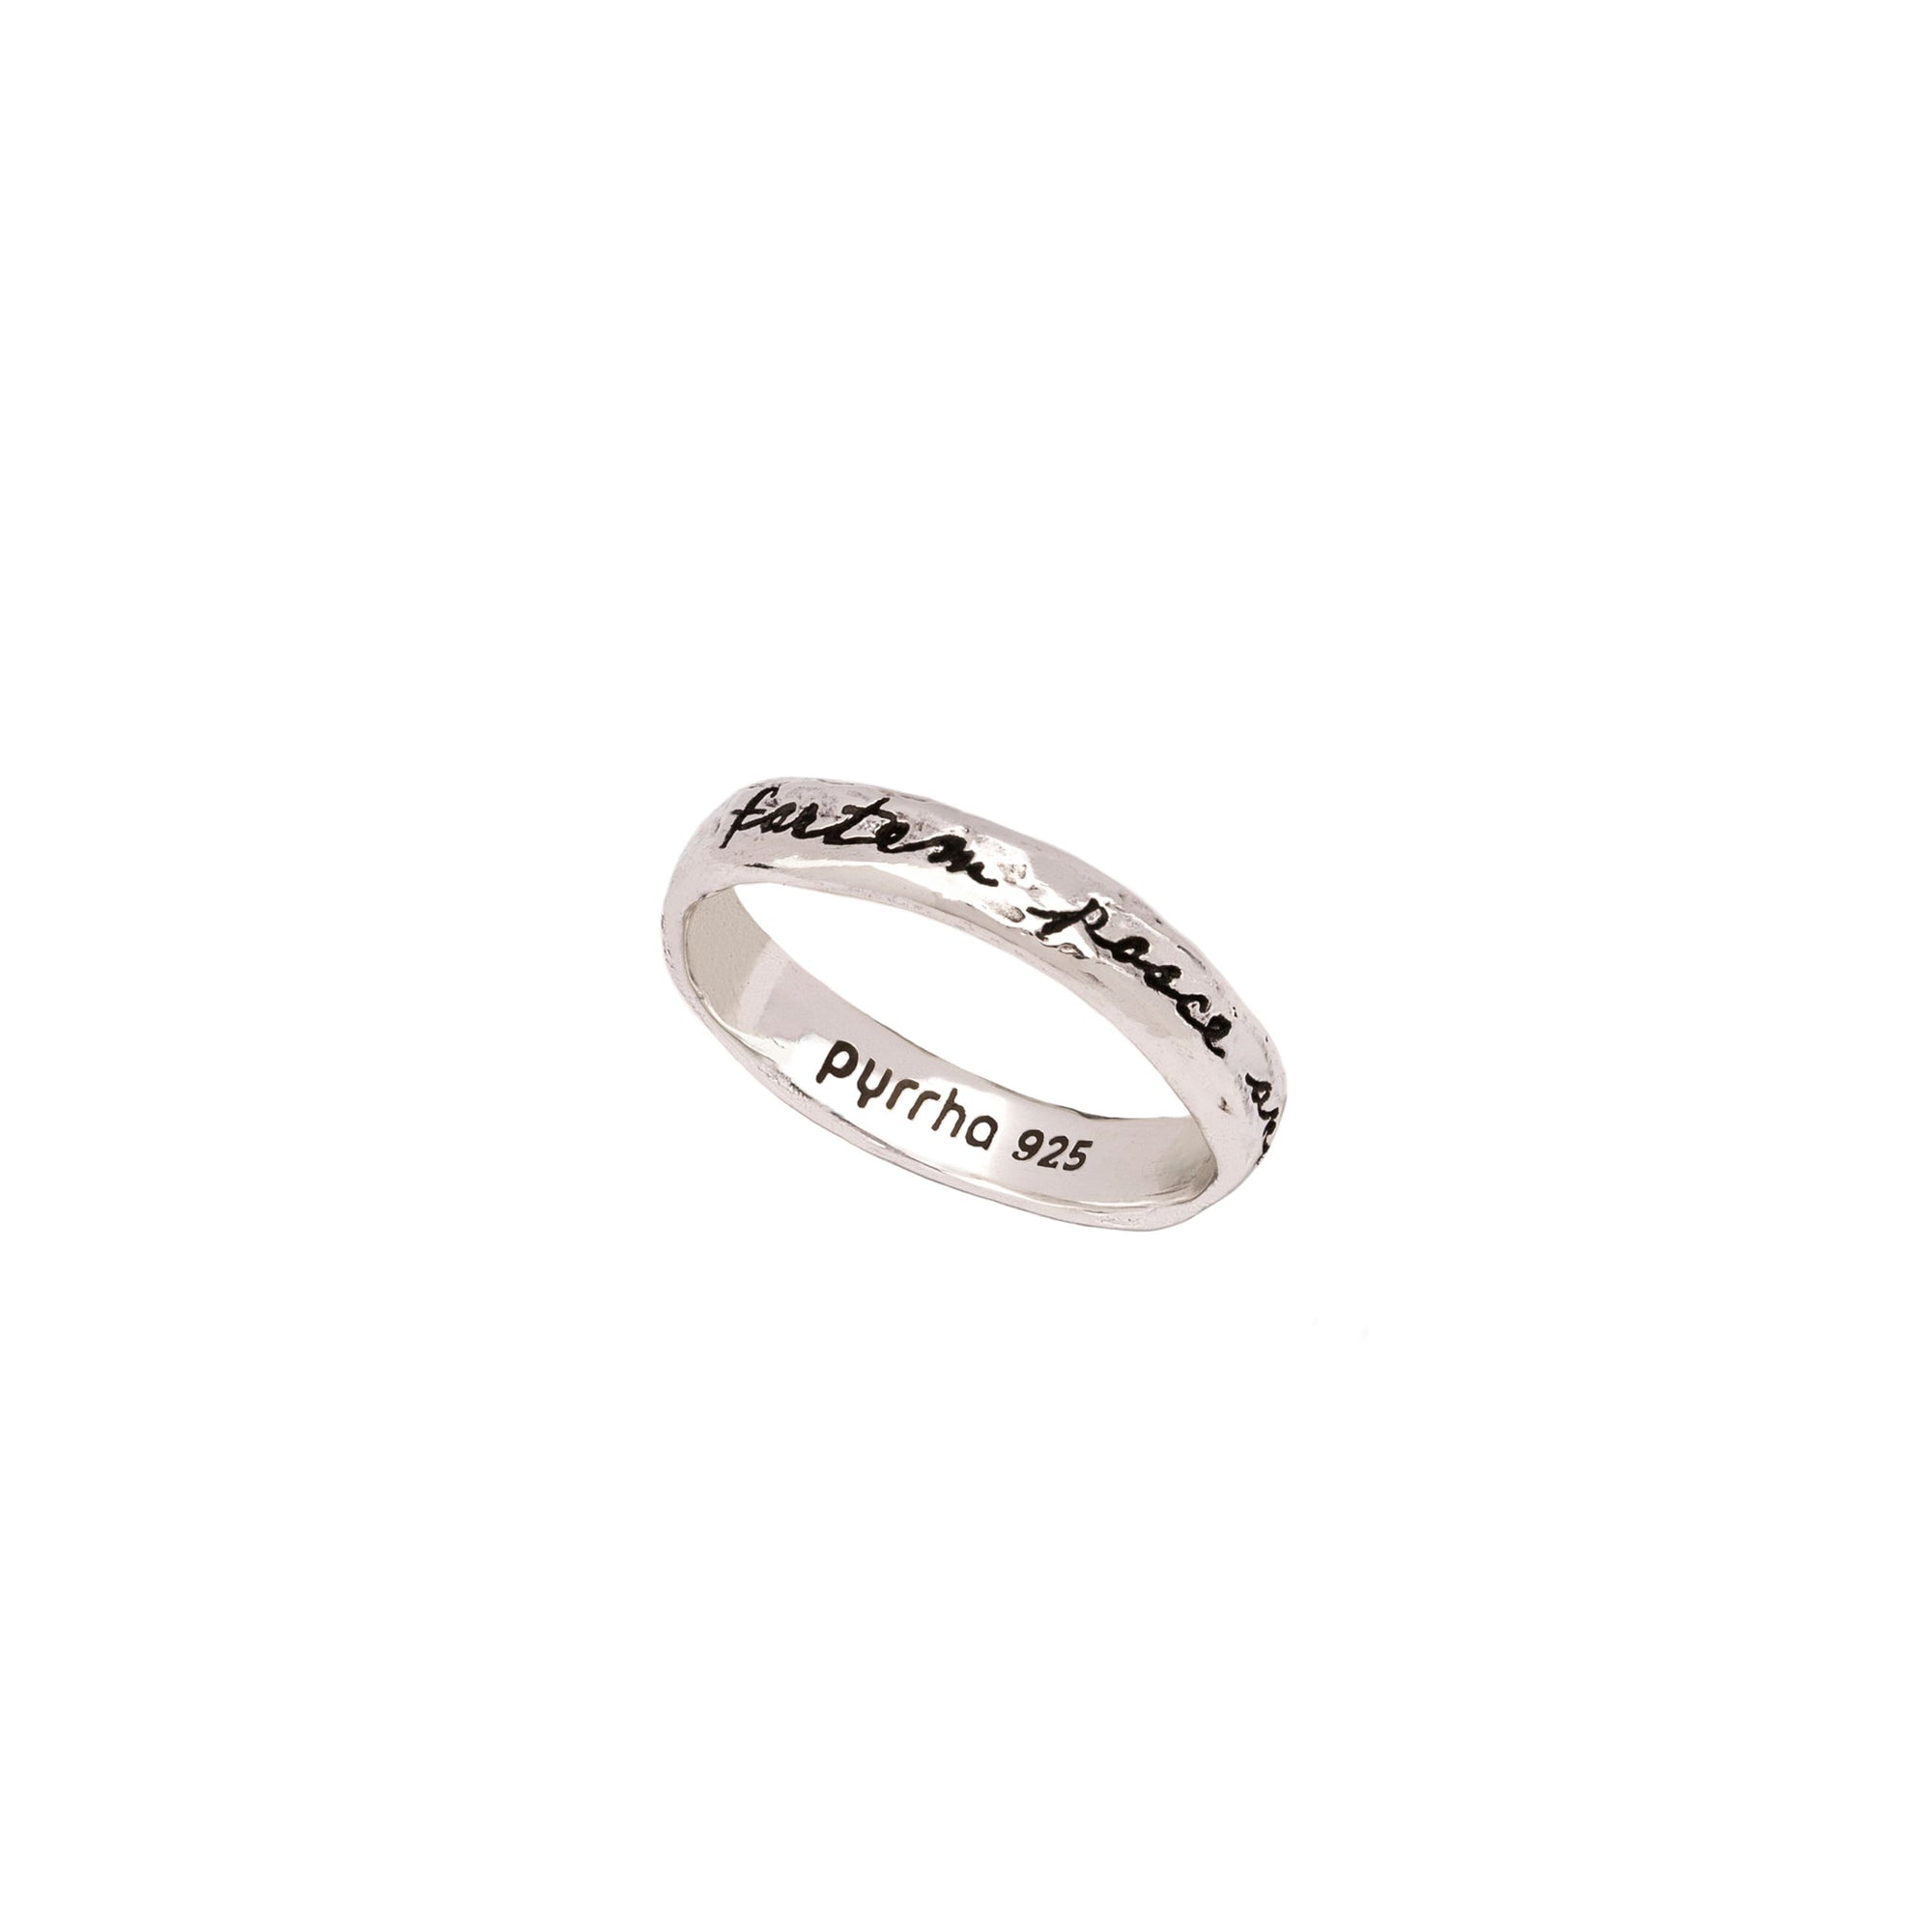 An engraved silver band ring representing the courage to challenge life